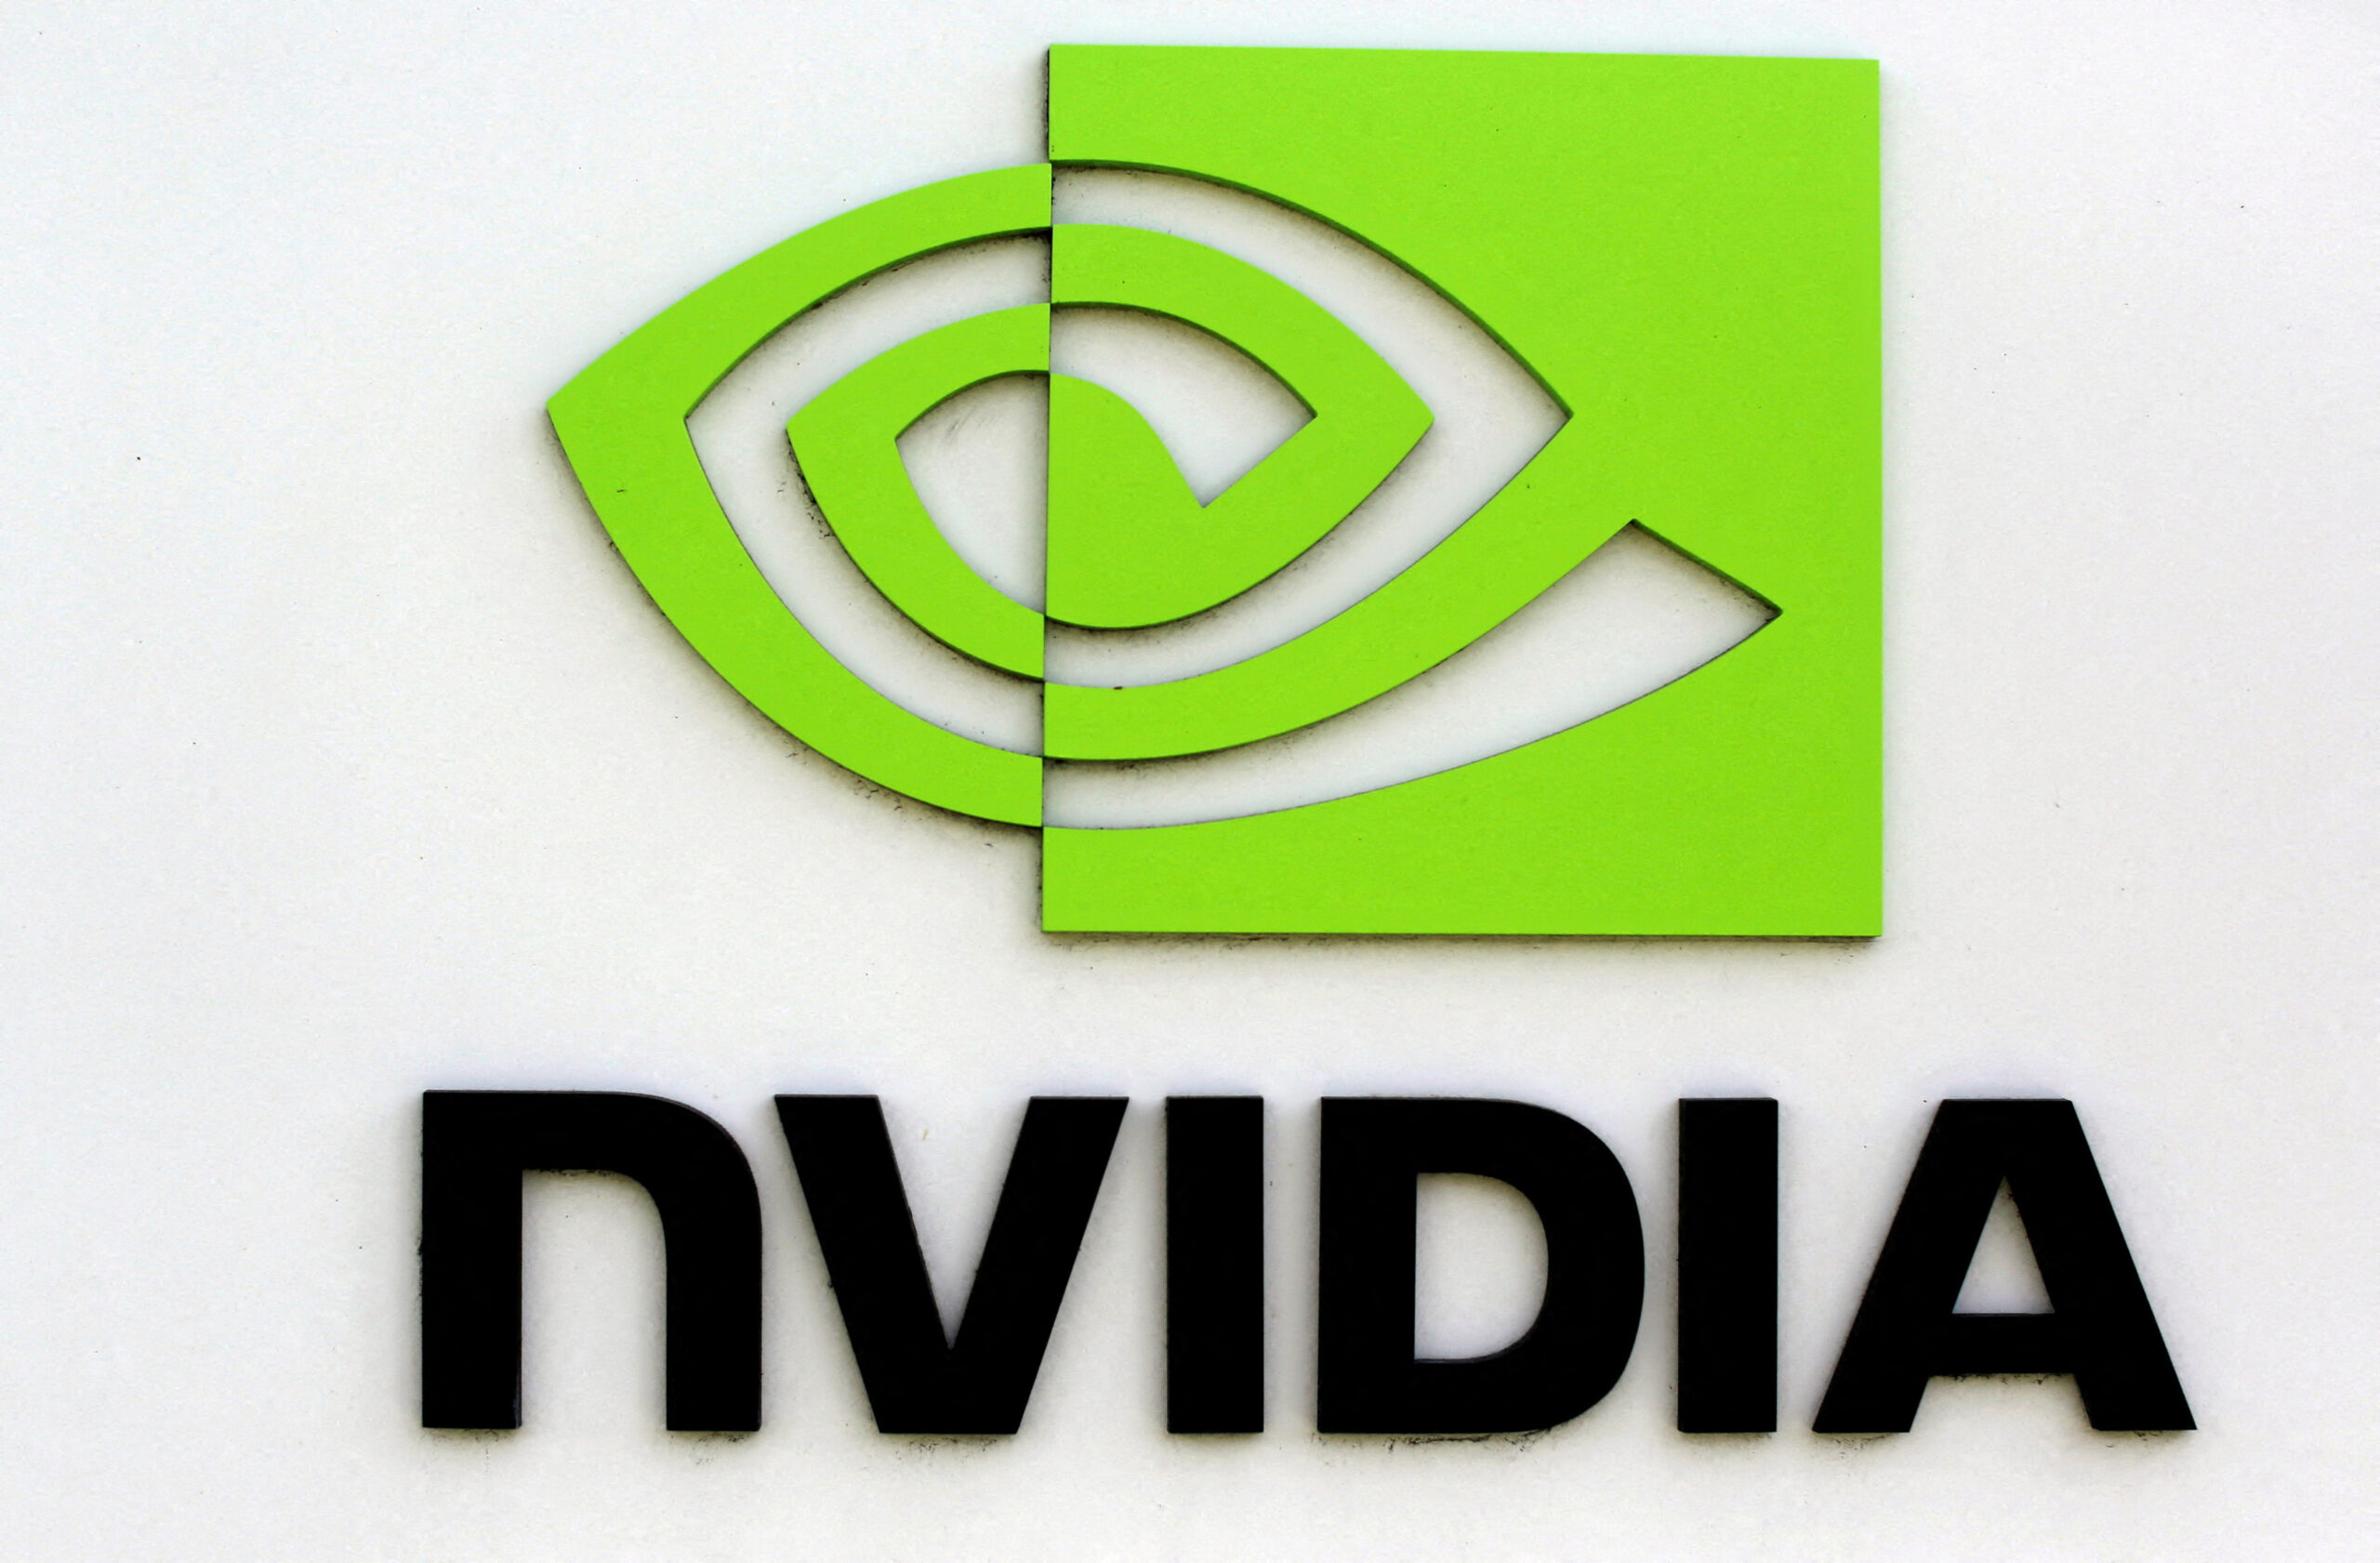 10 Significant Business Partners of Nvidia